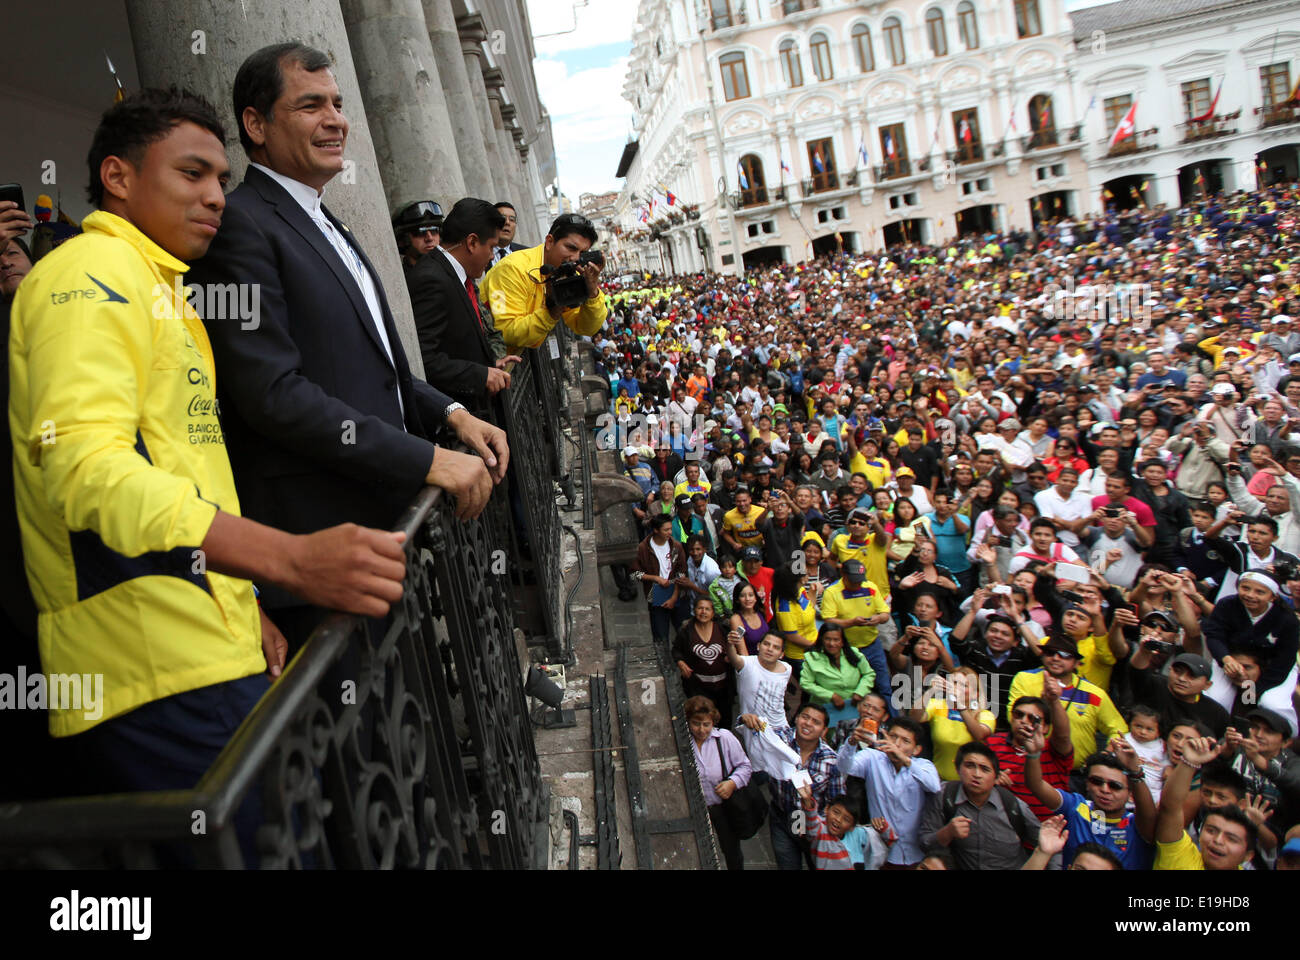 Quito. 28th May, 2014. Ecuator's President Rafael Correa (2nd L) and player Jefferson Montero (1st L) react during the farewell act for Ecuador's national soccer team, in the Grande Square, in Quito, capital of Ecuador. Ecuador's national soccer team got farewell by its supporters in an act where President Rafael Correa delivered to the capitan Luis Antonio Valencia the Tricolor Flag as sign of support to the team by the Ecuatorian people, according to local press. © Santiago Armas/Xinhua/Alamy Live News Stock Photo